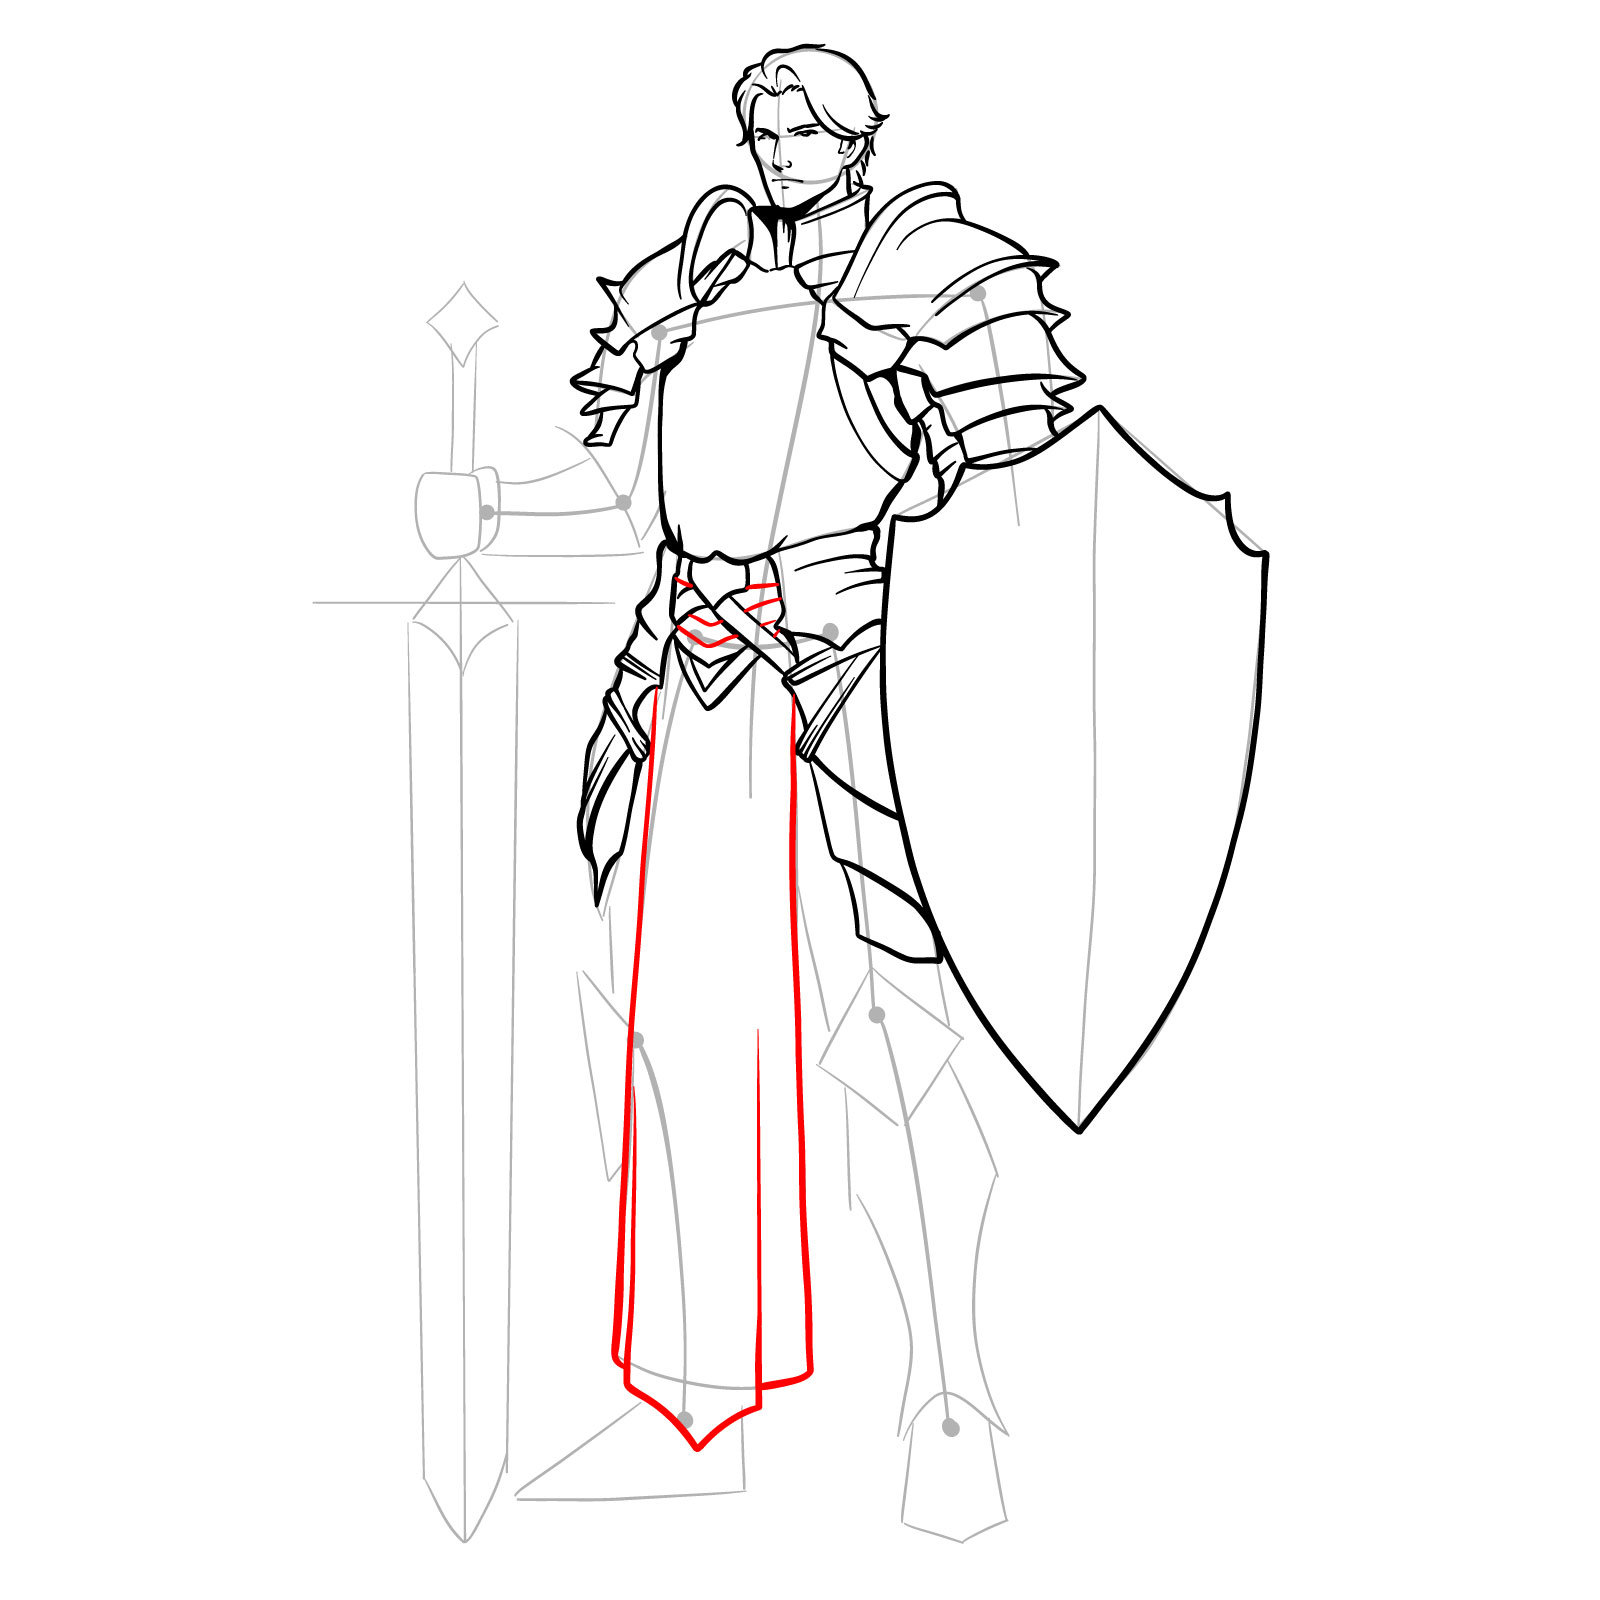 Adding a central piece of cloth and straps at the waist of the male paladin drawing - step 15